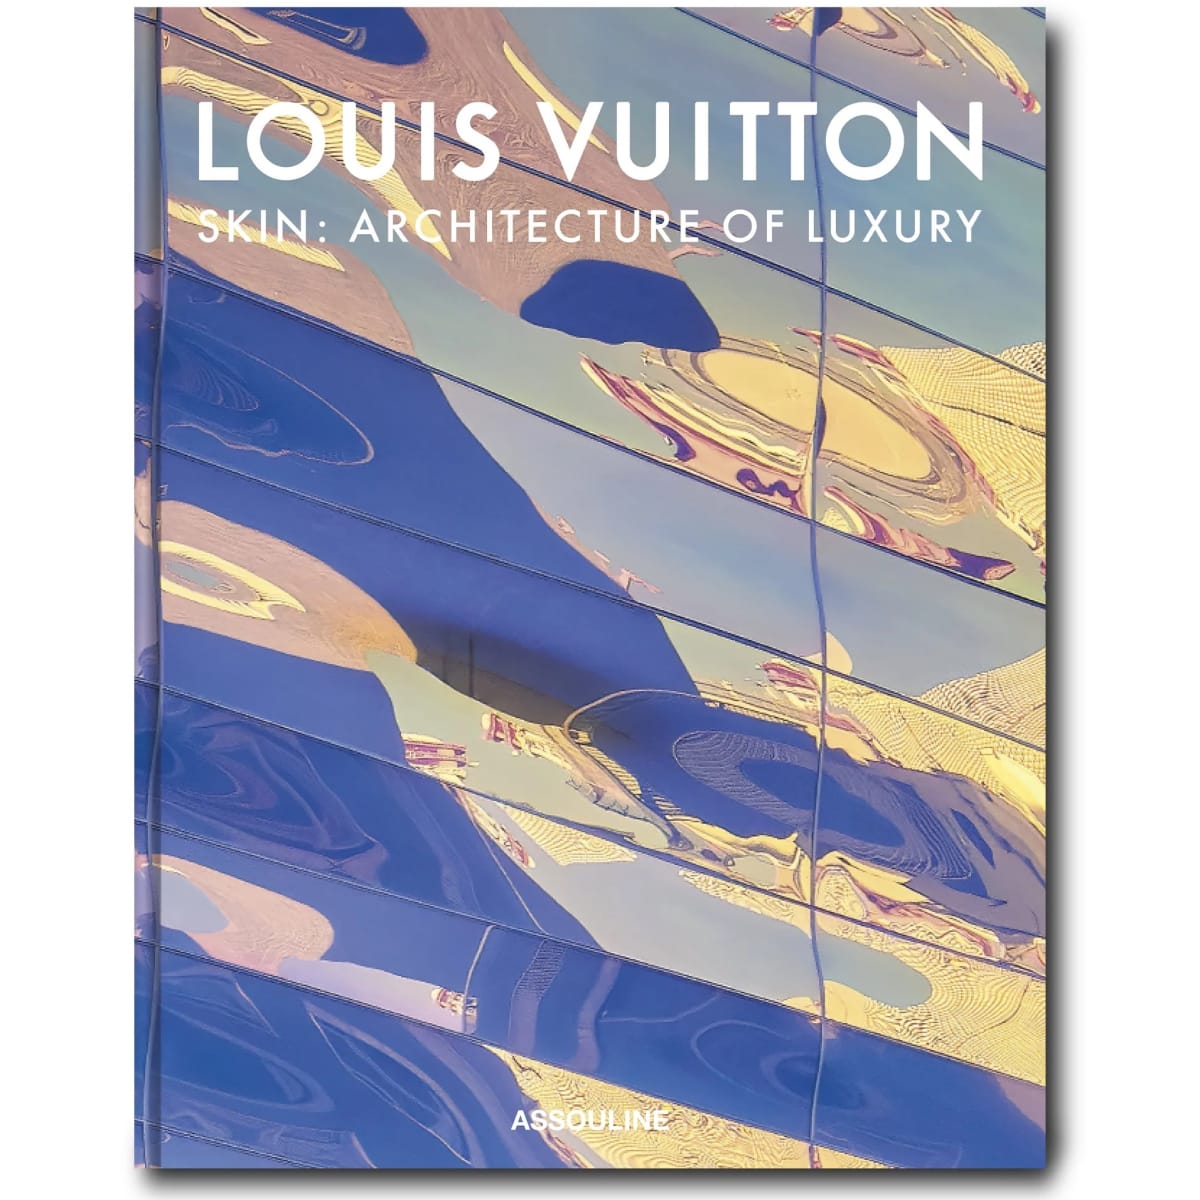 Modern Luxury Interiors op Instagram : Written by Pulitzer Prize-winning  author Paul Goldberger, Louis Vuitton has released a gorgeous volume named “Louis  Vuitton Skin: The Architecture of Luxury,” which explores the façades